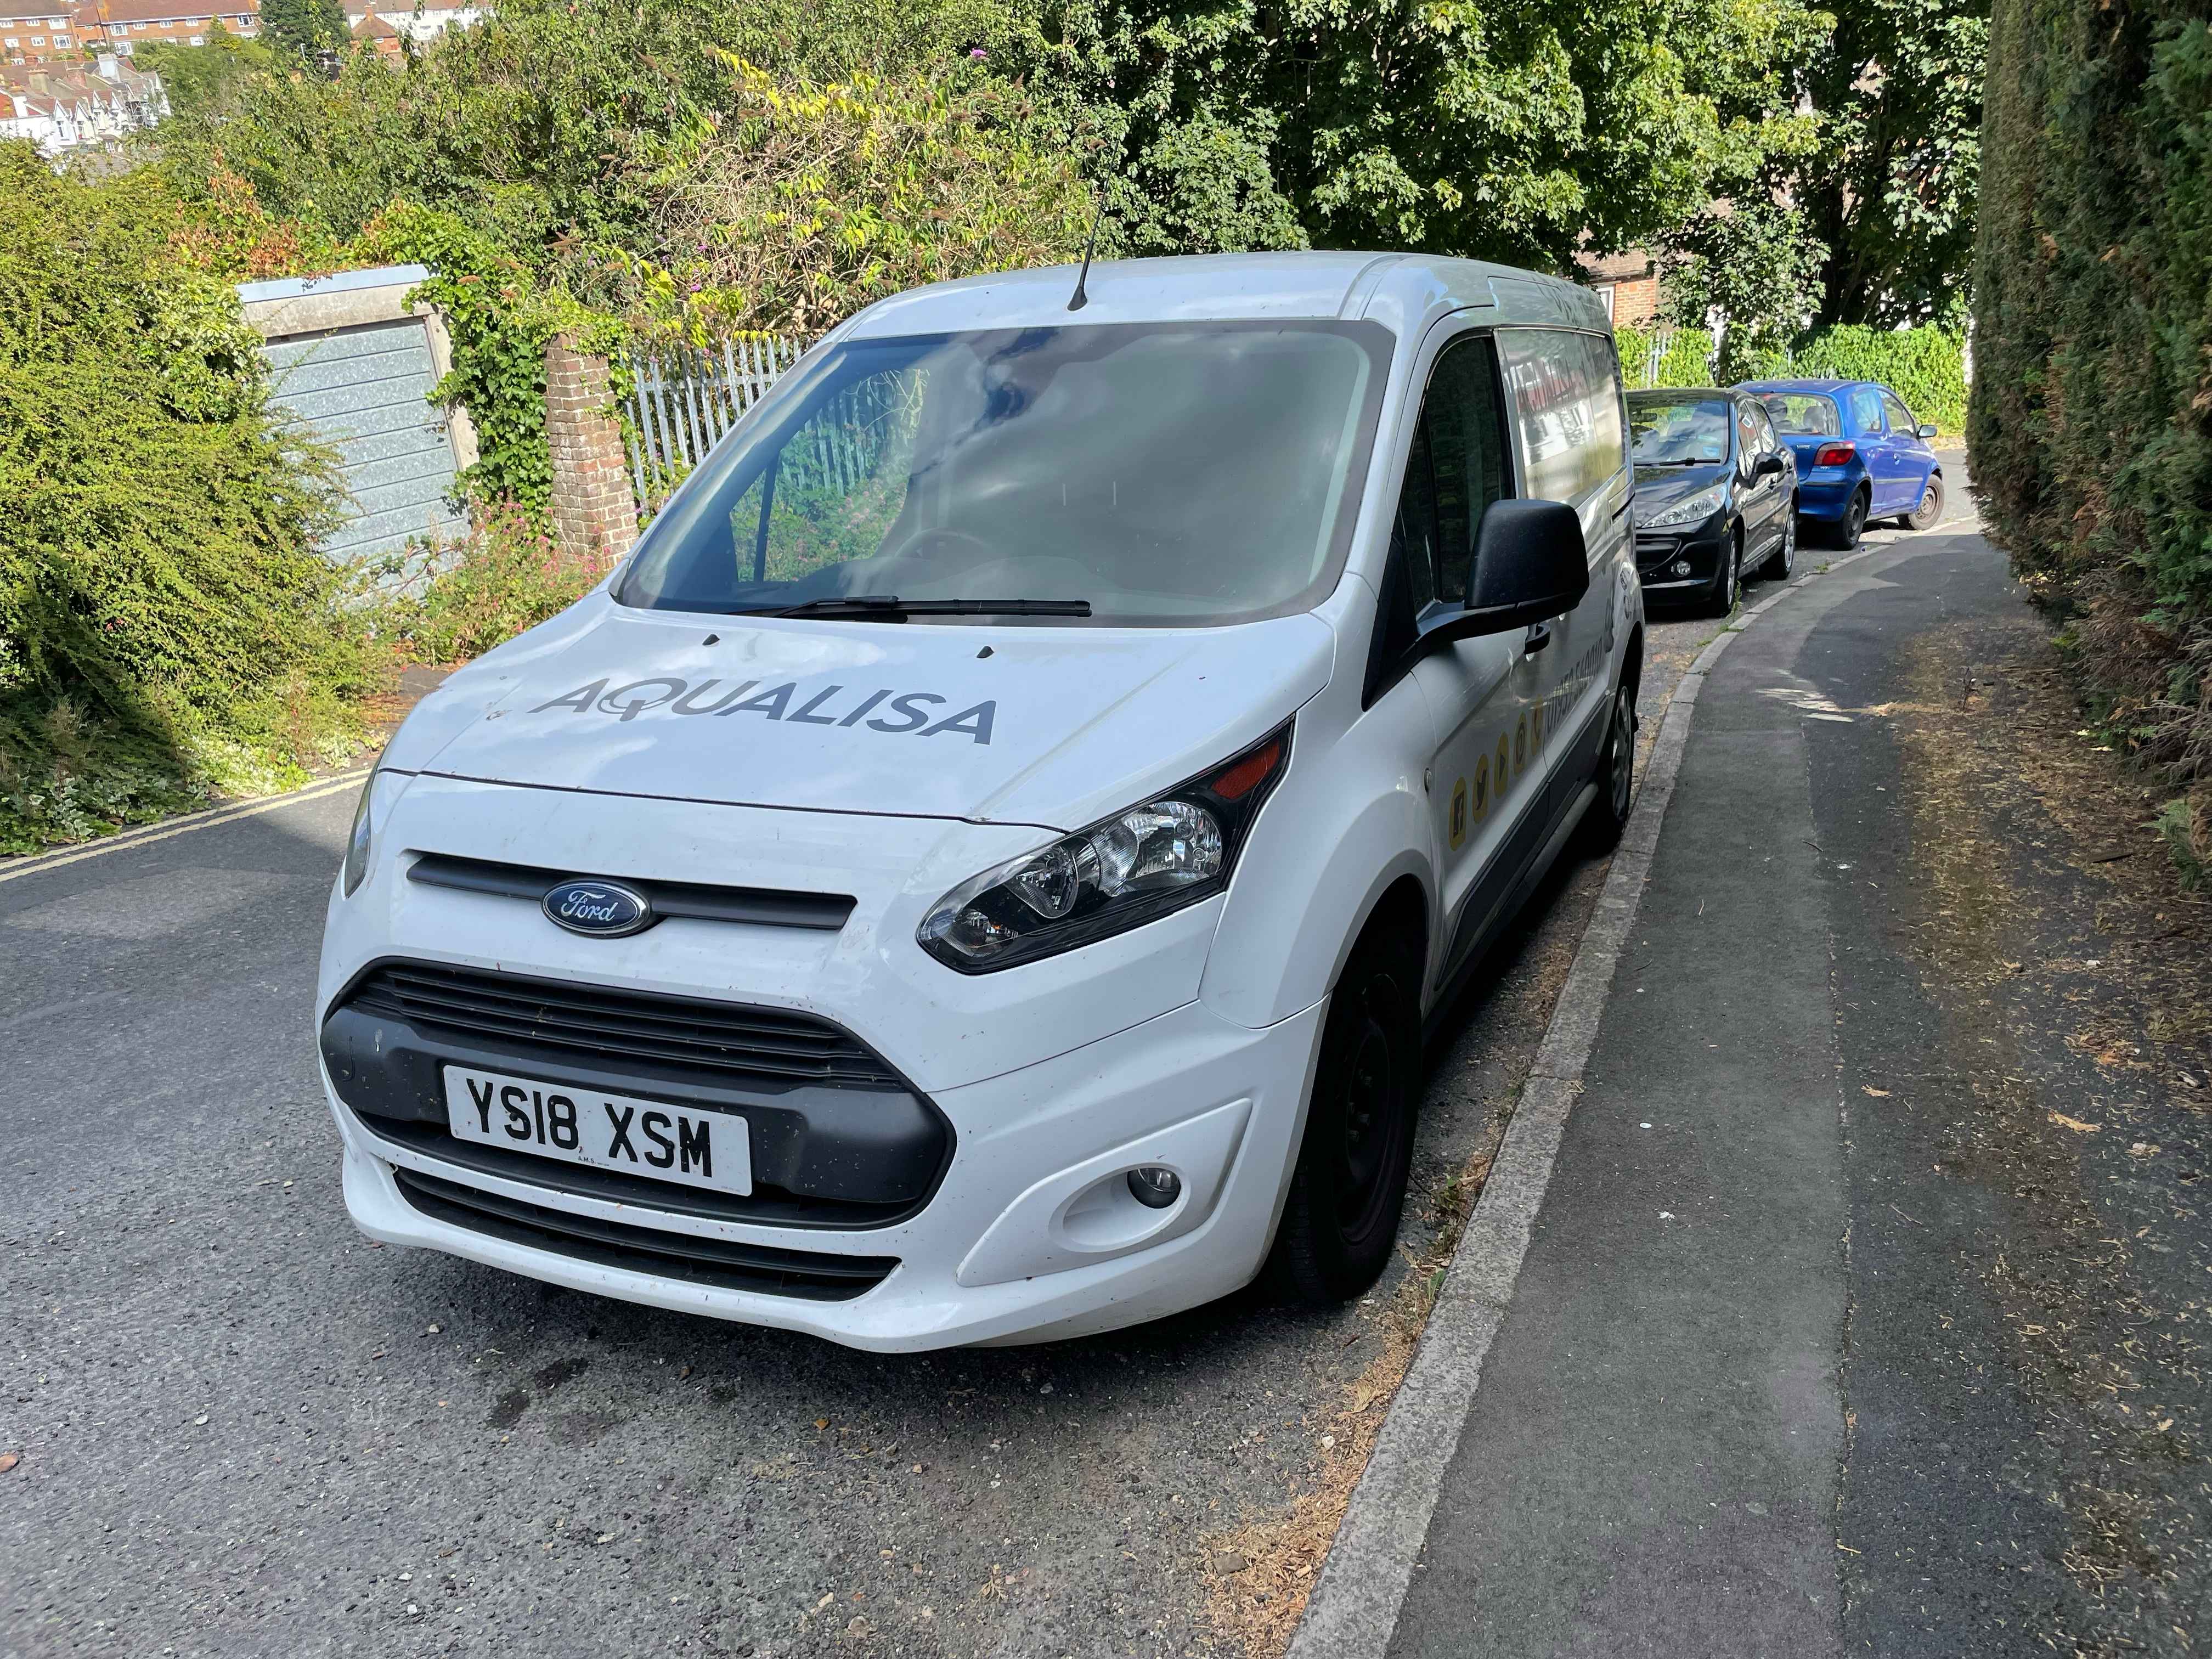 Photograph of YS18 XSM - a White Ford Transit Connect parked in Hollingdean by a non-resident. The first of five photographs supplied by the residents of Hollingdean.